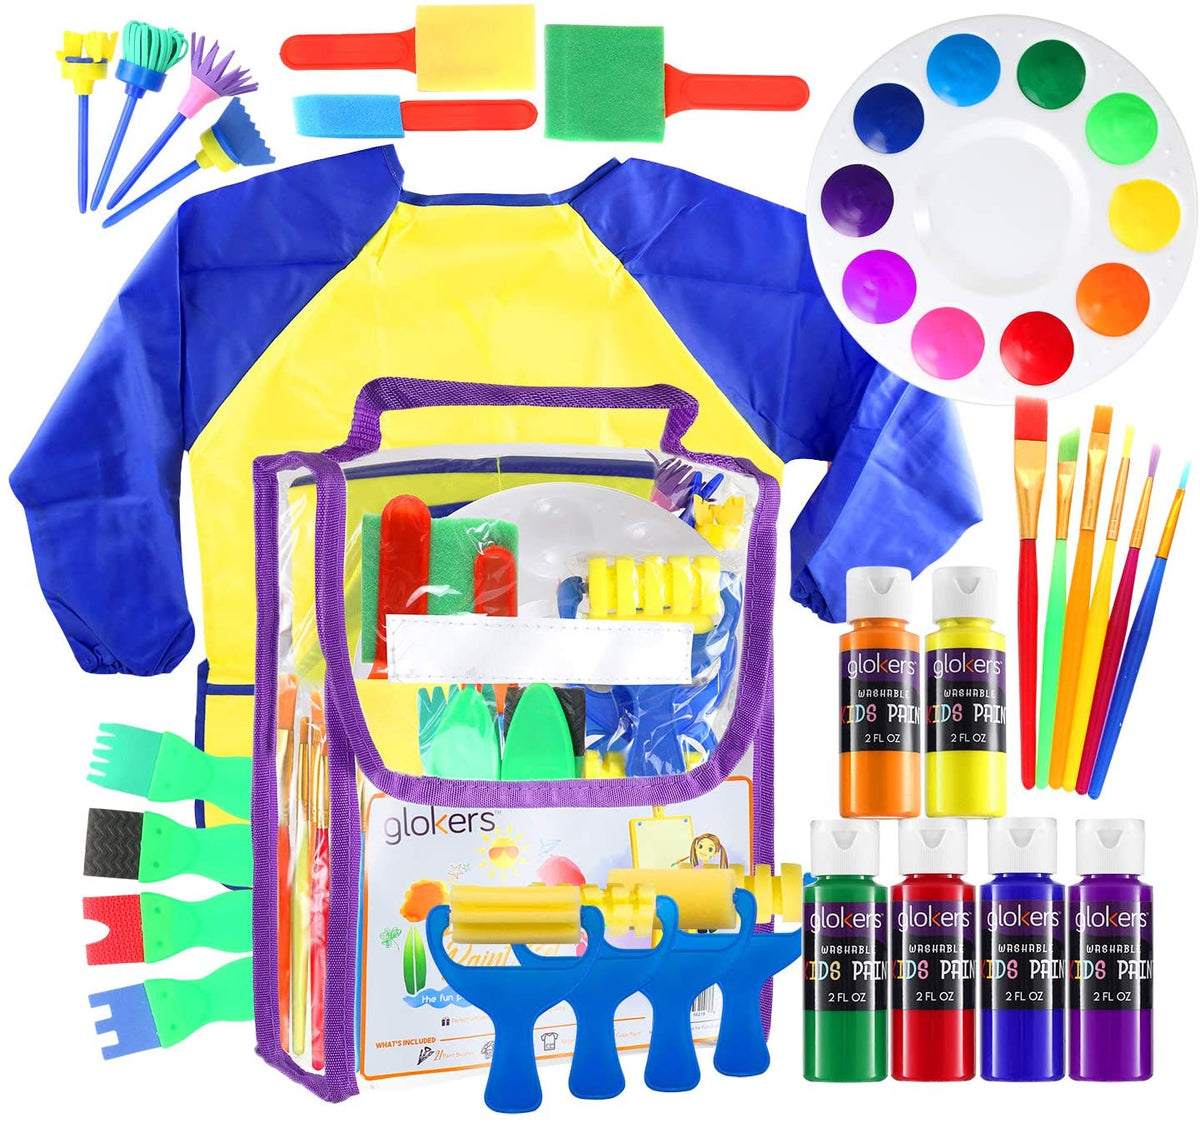 glokers Kids Painting Supplies Set - Arts Set with Acrylic Paints, Easel,  Paintbrushes, Canvases, Palettes, Smock & Travel Storage Bag - Premium